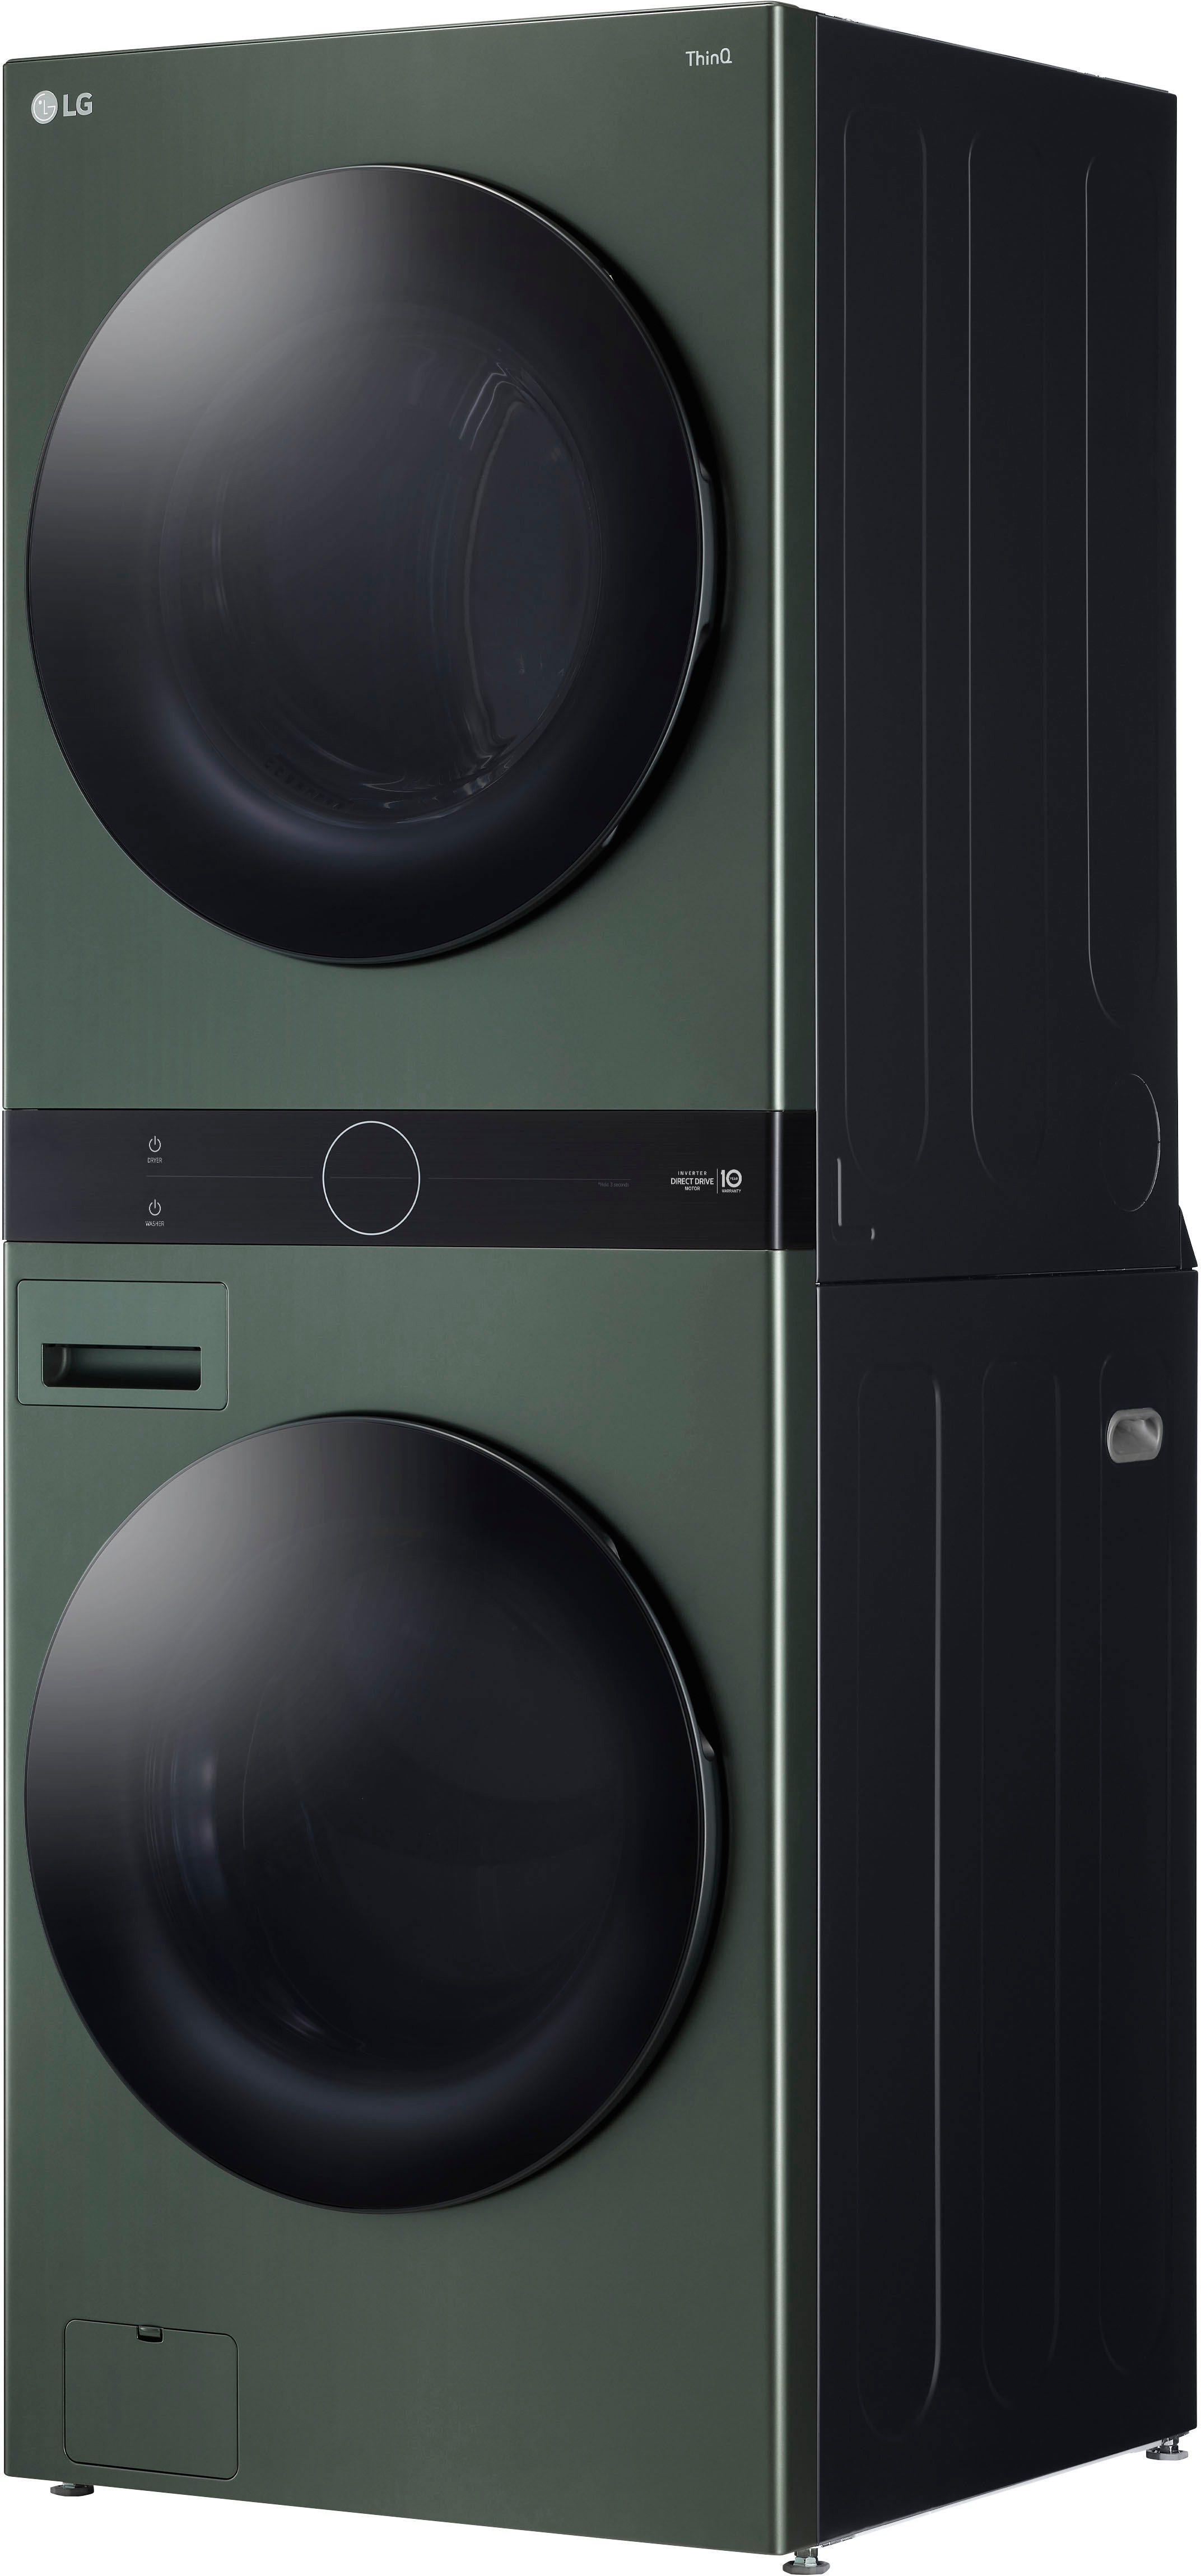 Angle View: LG - 4.5 Cu. Ft. HE Smart Front Load Washer and 7.4 Cu. Ft. Gas Dryer WashTower with Steam and Built-In Intelligence - Nature Green